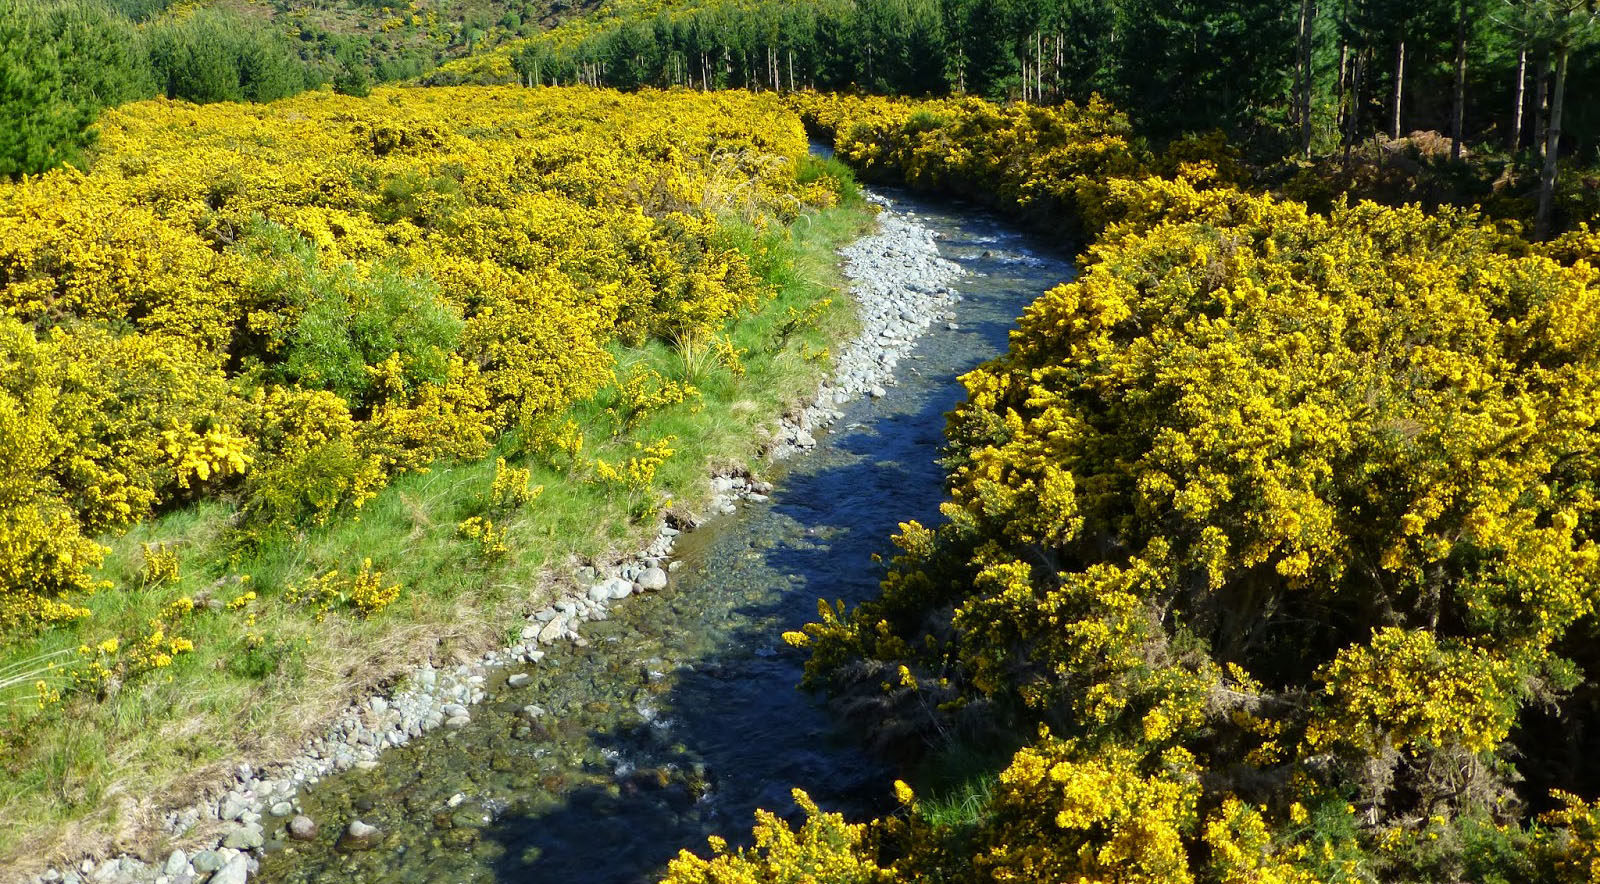 Gorse infestation along riverbed, destroying the river’s natural characteristics